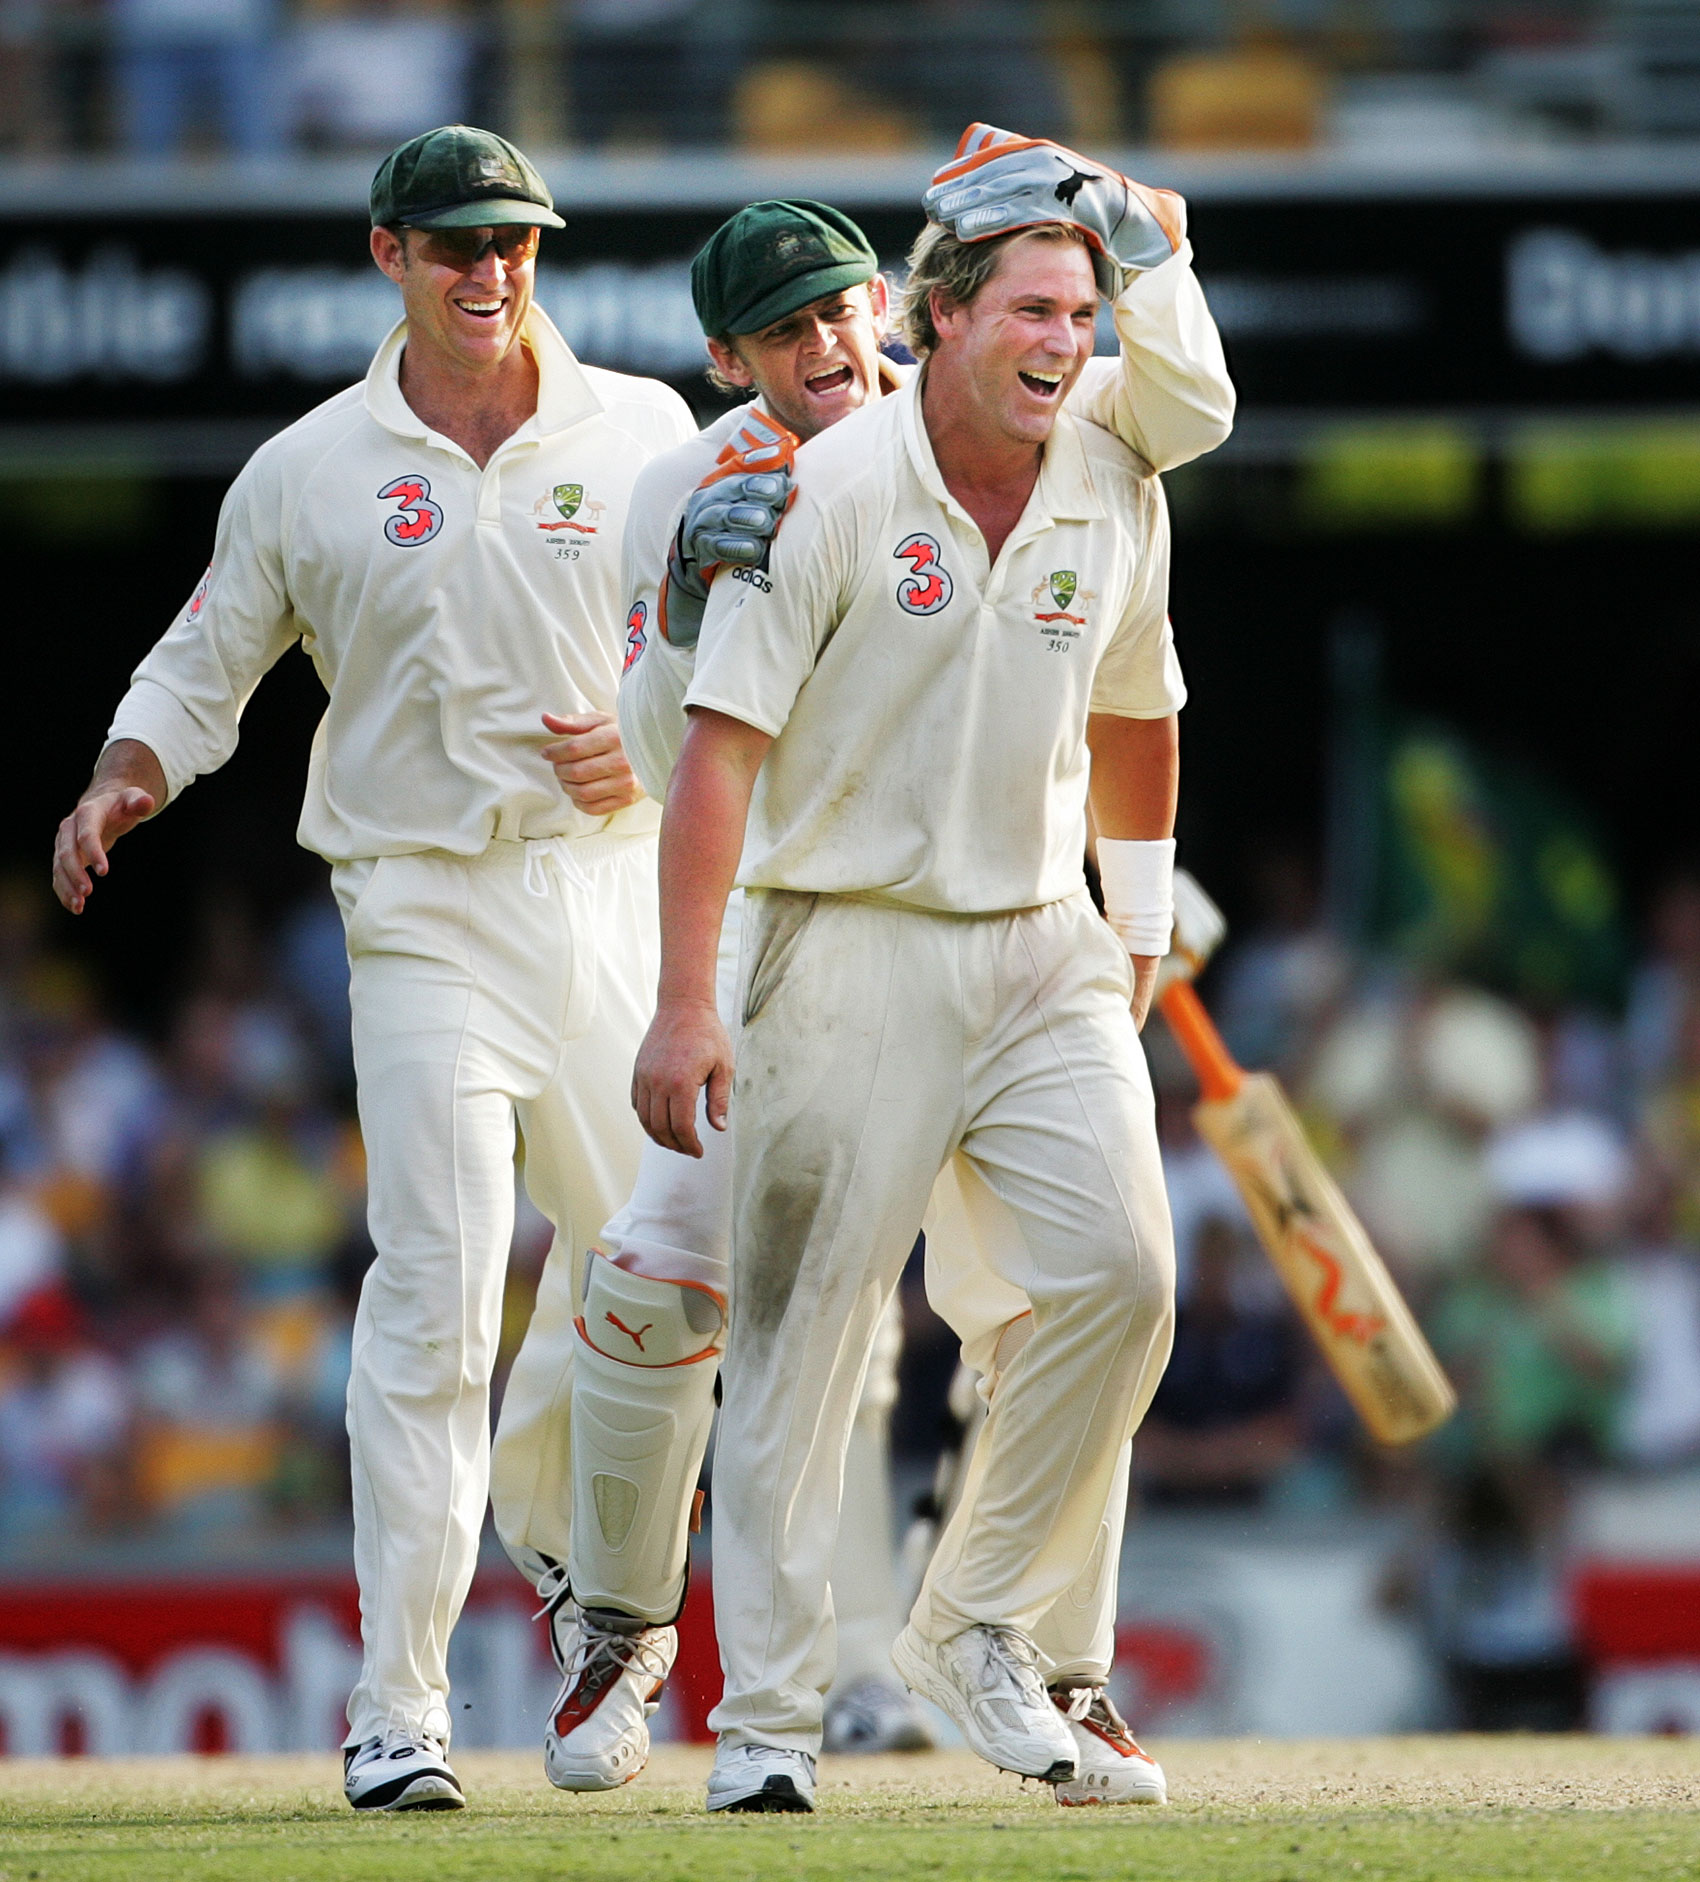   Wicketkeeper Adam Gilchrist congratulates bowler Shane Warne after wicket during first test of Australia v England Ashes series at the Gabba in Brisbane.  